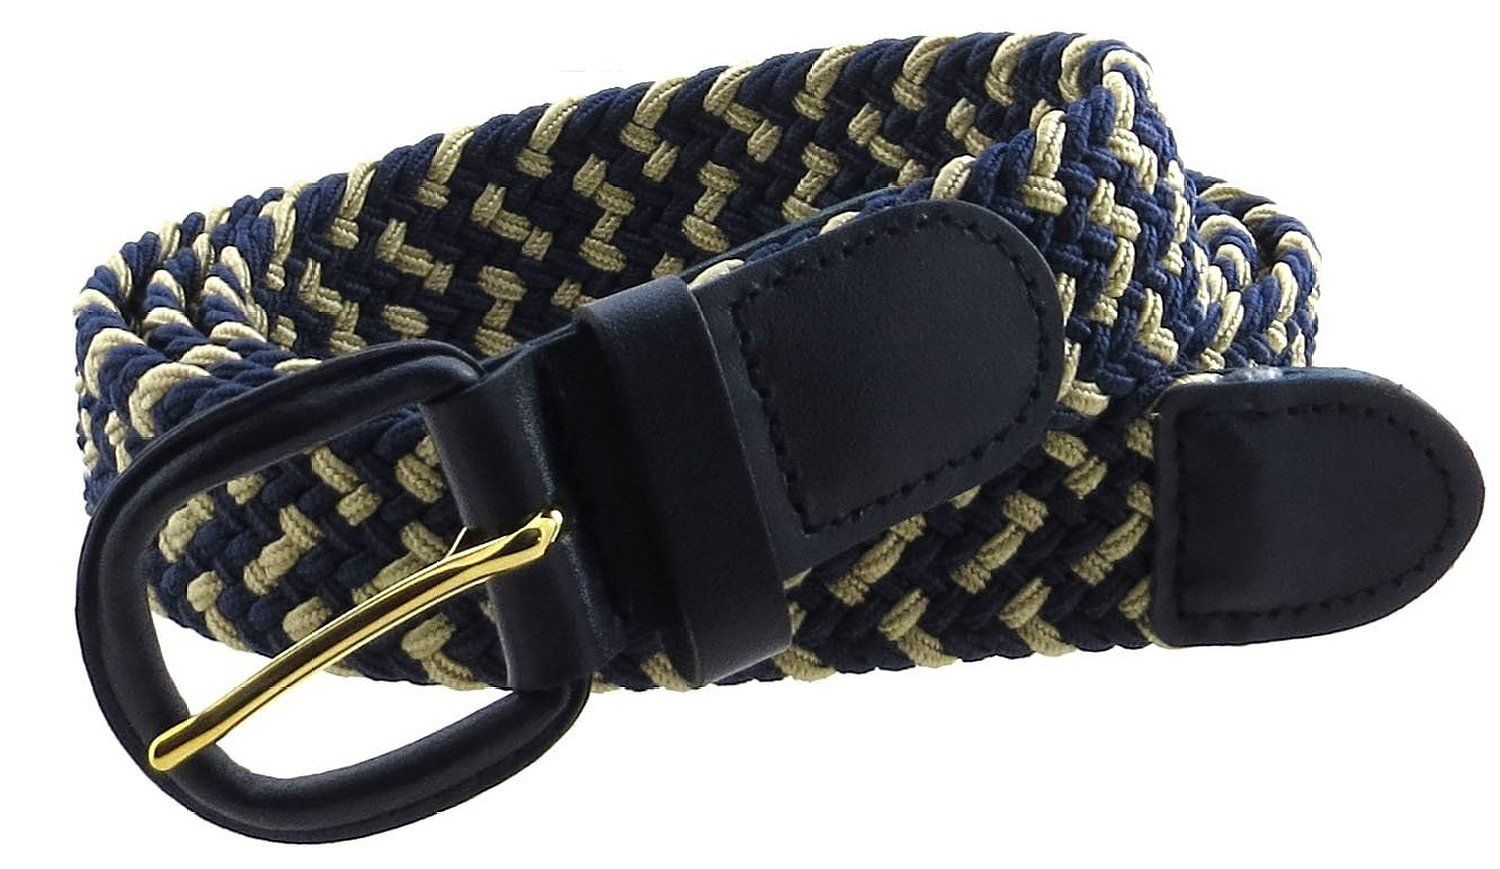 Unisex Braided Elastic Woven Stretch Belt with Genuine Leather Buckle Grey Color